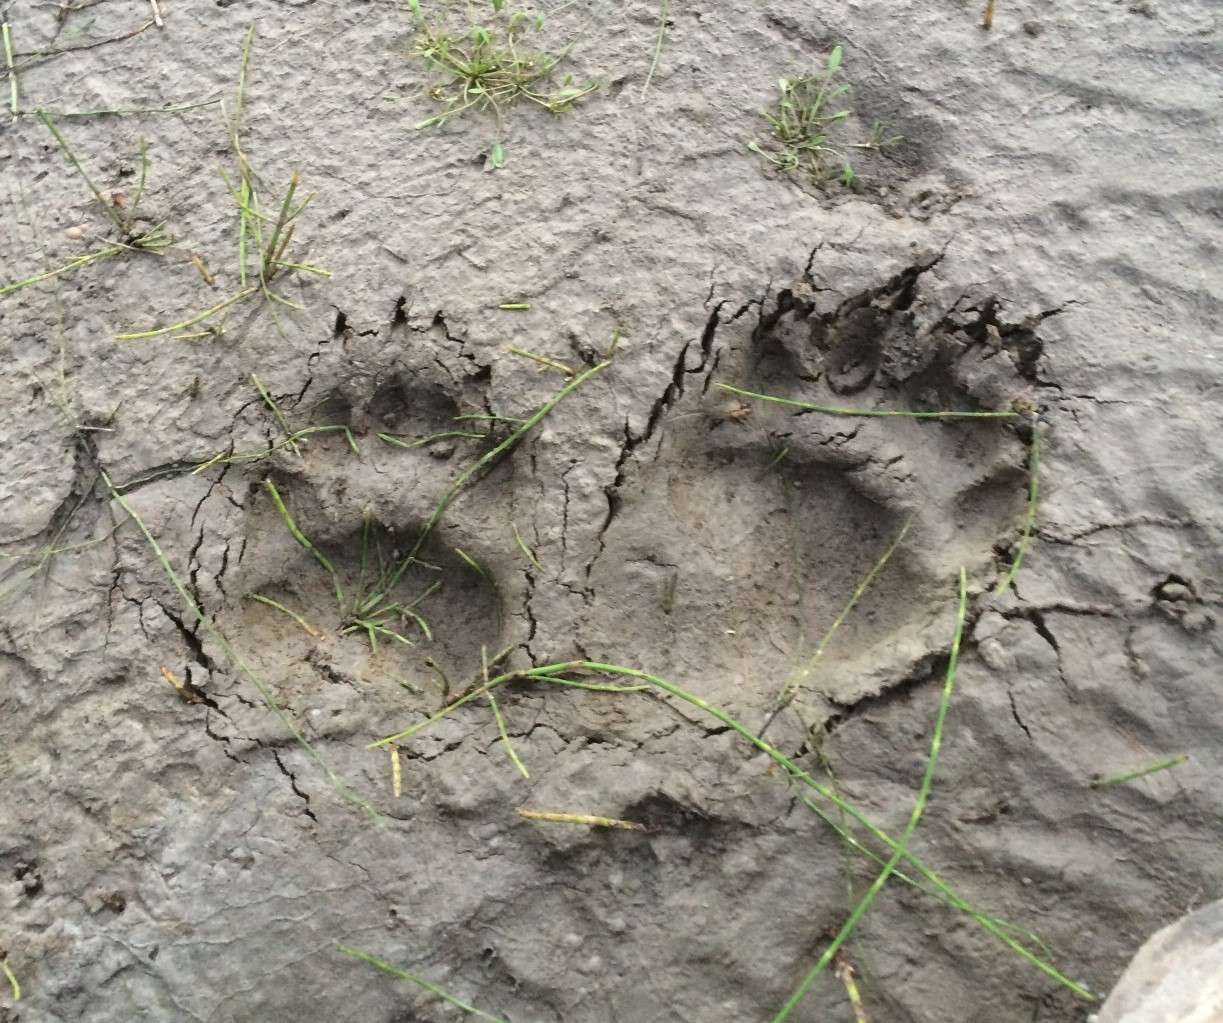 Set of two animal tracks, one large and one small.